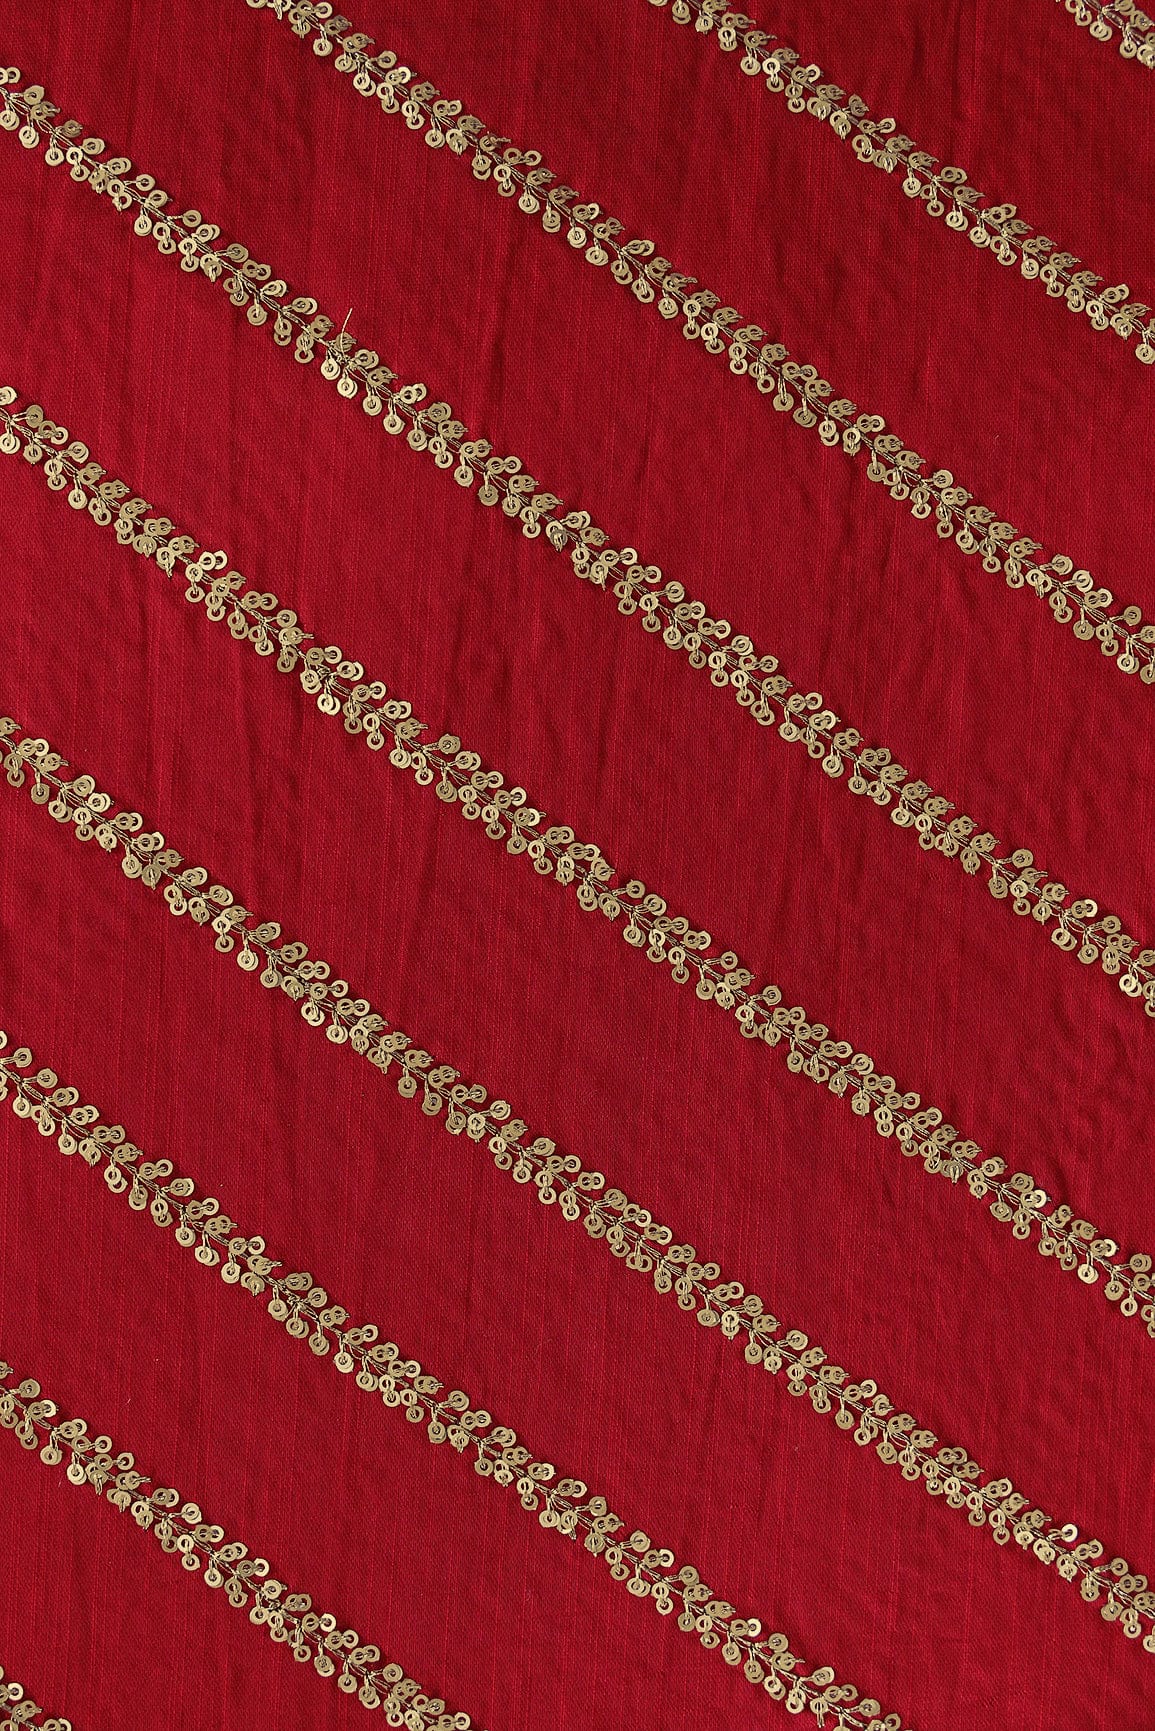 doeraa Embroidery Fabrics Gold Sequins With Gold Zari Stripes Embroidery Work On Red Raw Silk Fabric